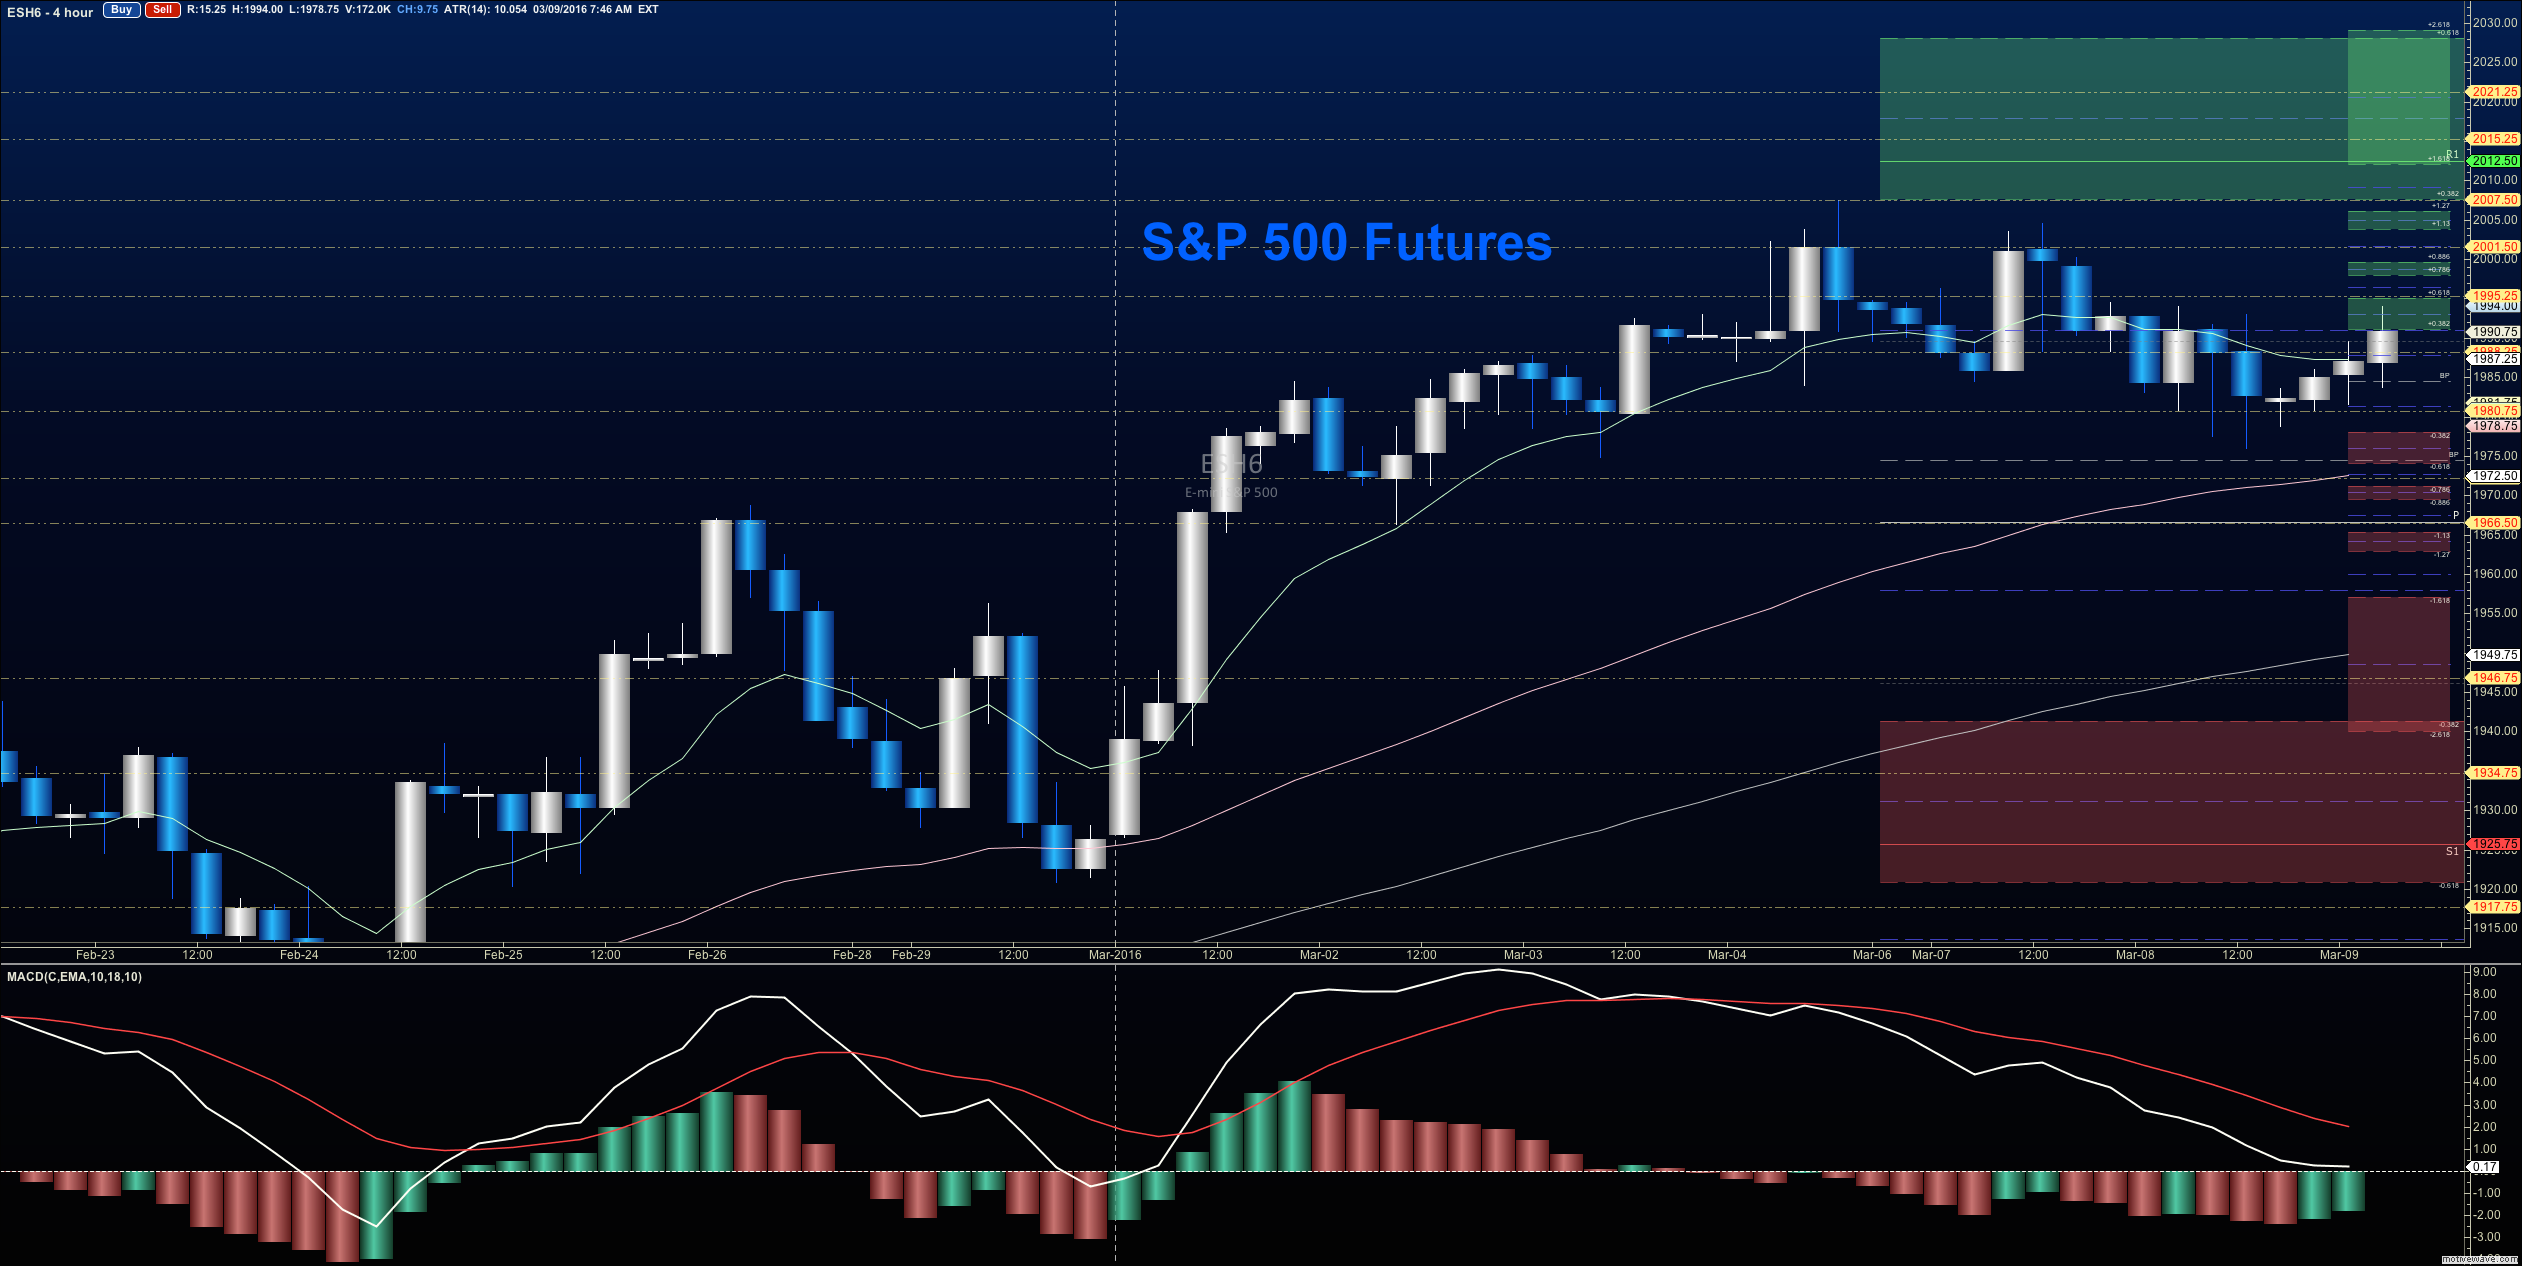 S&P 500 Futures Continue To Consolidate In Choppy Range